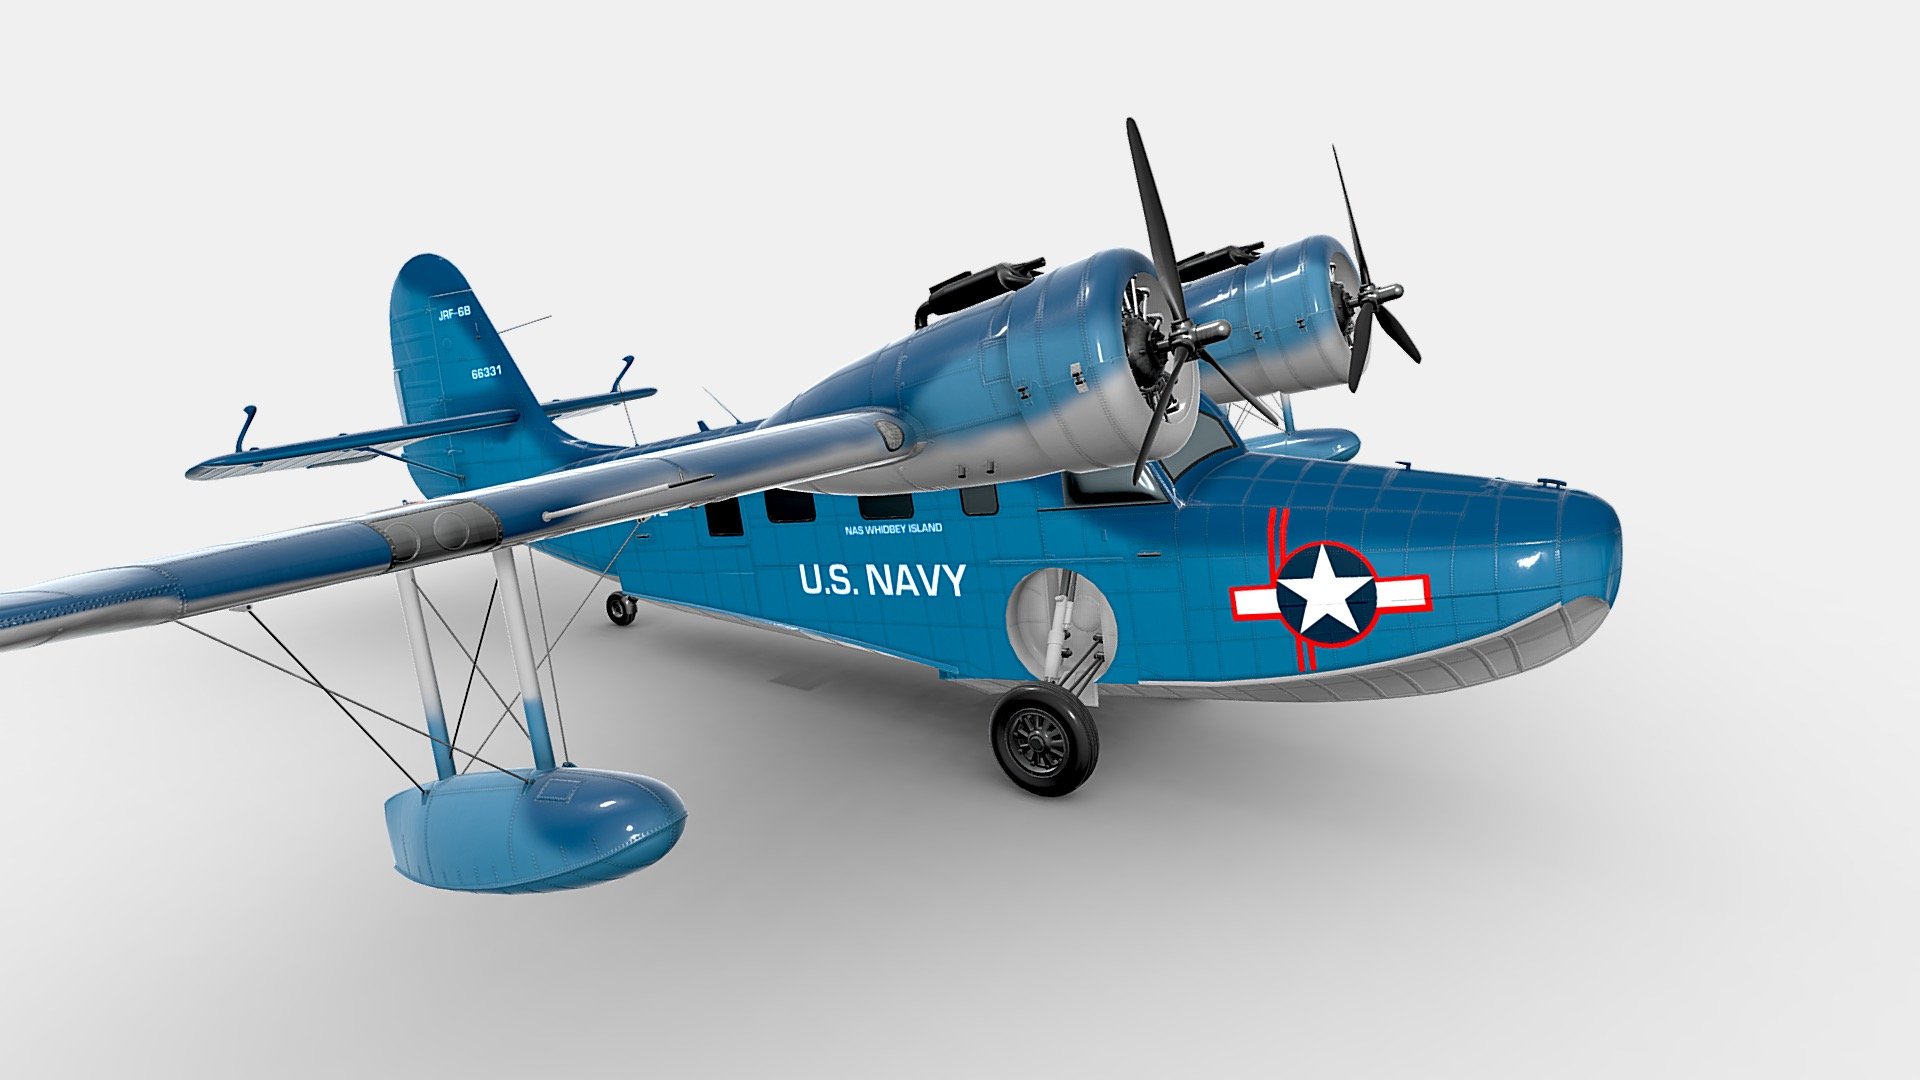 The Grumman G-21 Goose is an aircraft designed and built by Grumman. Produced from 1938 to 1945. It is amphibious.
It has a realistic look and is fully textured.
It has convenient pivots for easy movement,
including ailerons, flaps, elevator, rudder, propellers, and landing gear retraction.

has real size
Super Rocket, detailed exterior.
Textured (4k-2k) and unwrapped UVW - each object has a material name, you can easily change or apply materials - maximum format:
3ds max 2016 with VRay materials
Blender with materials
maya format: - Maya 2018 with default materials
.Obj format
.fbx format

All textures are included in the .zip file.
 - Goose US NAVY - Buy Royalty Free 3D model by IgYerm (@IgorYerm) 3d model